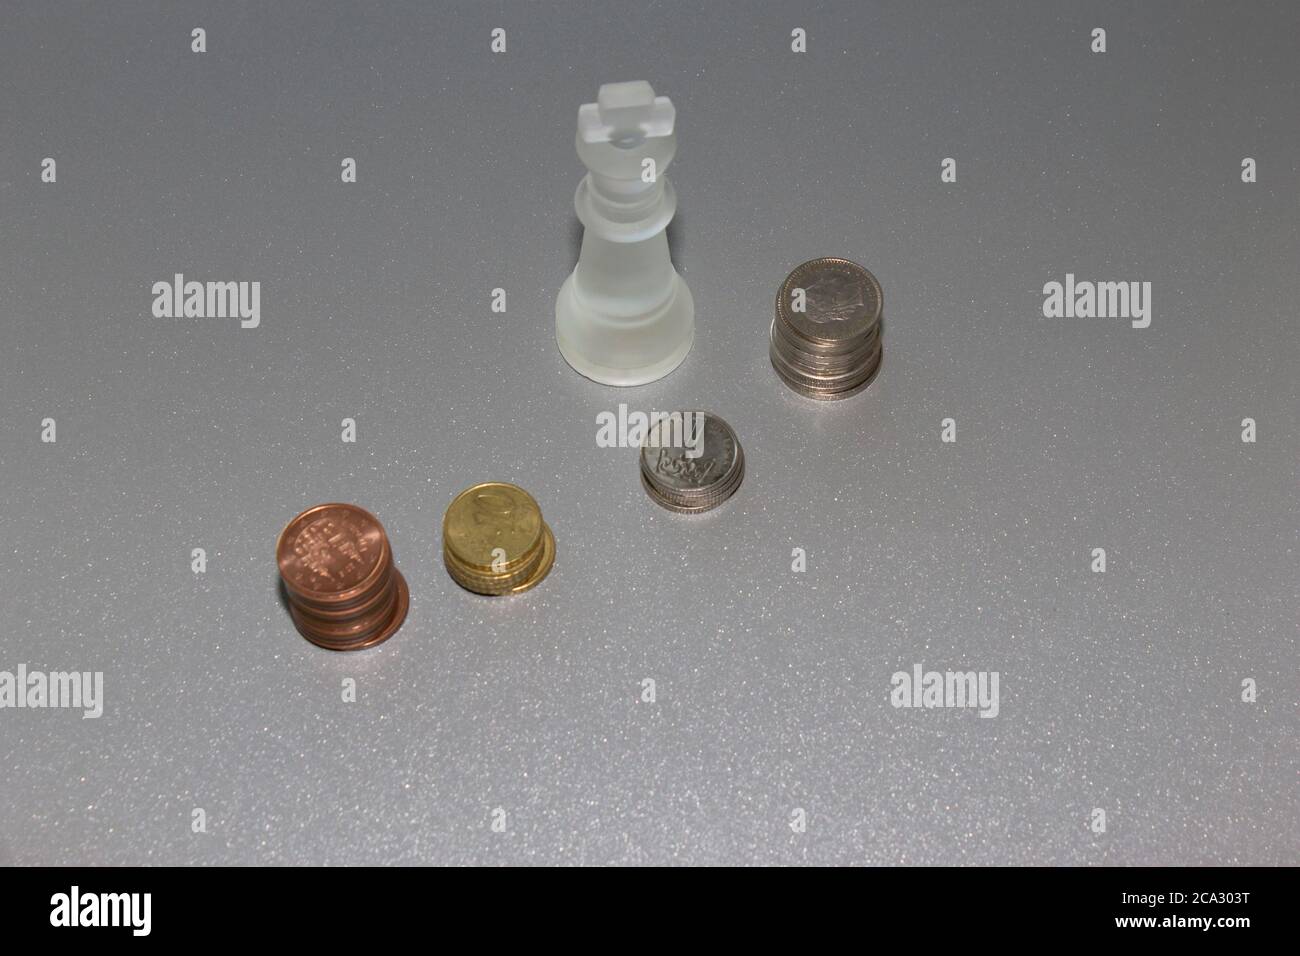 Top view of coins stacks,diferent sizes and colors with chess king piece on grey background.Saving money crisis,business and banking concept. Stock Photo